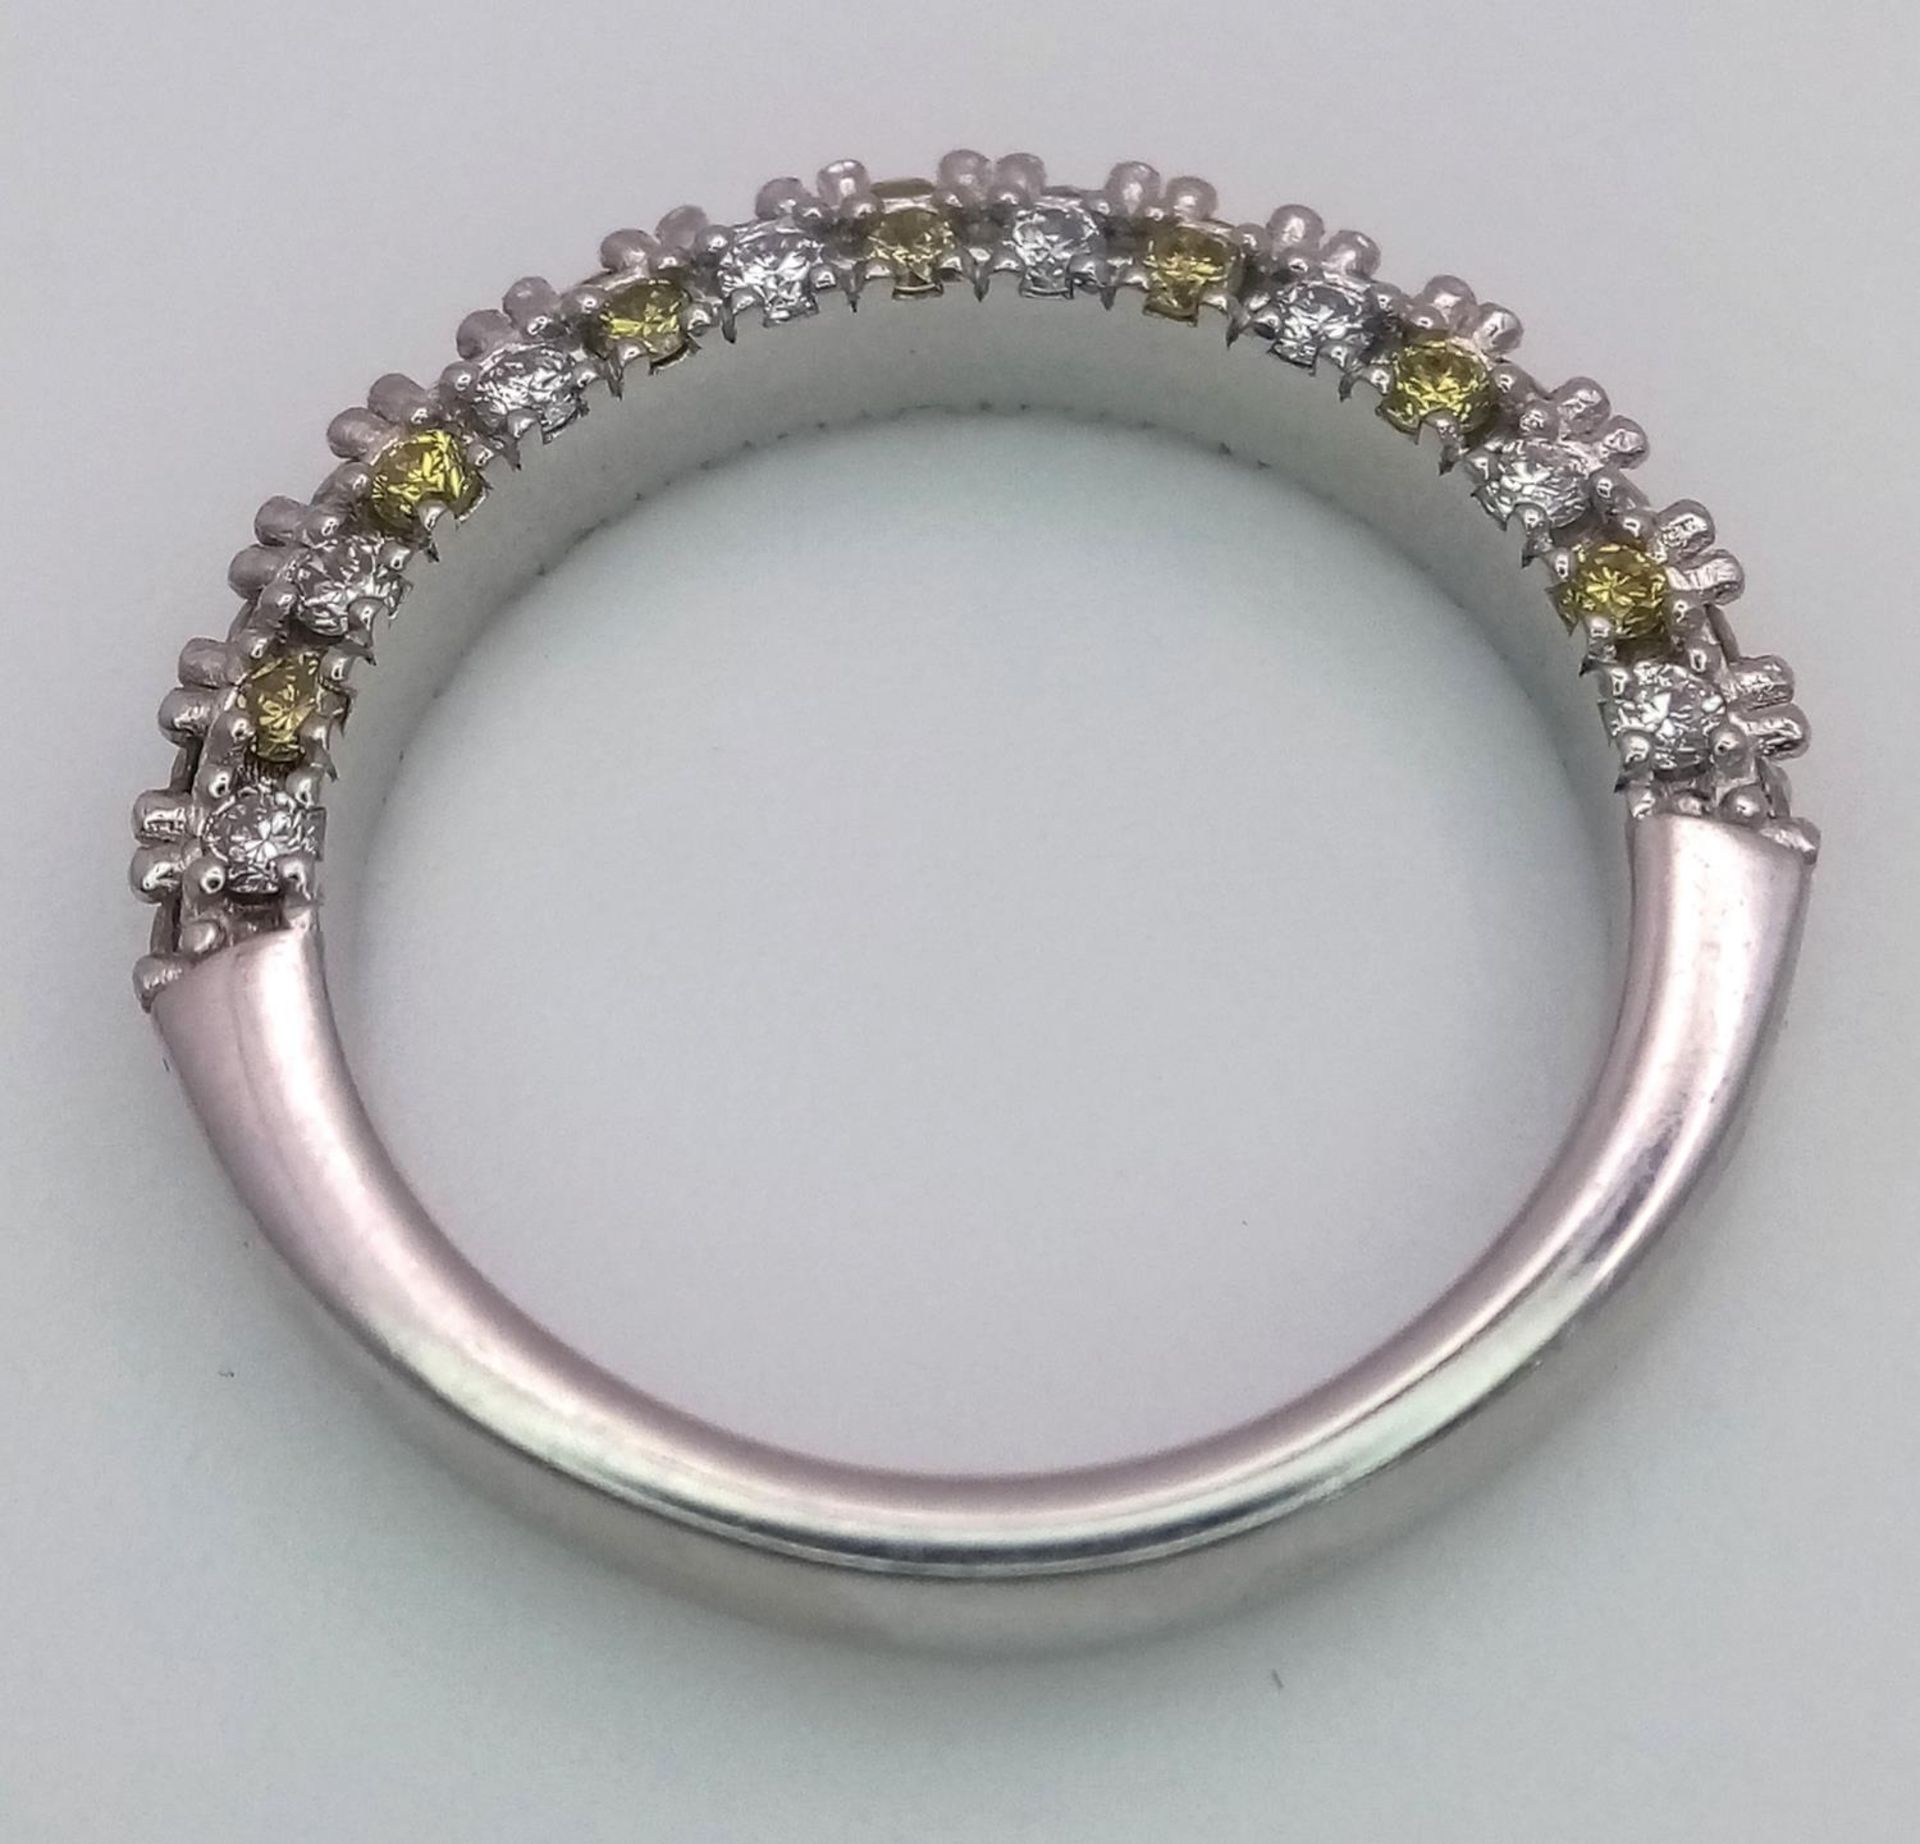 A Platinum White and Yellow Diamond Three-Sided Half Eternity Ring. Size L. 6.3g total weight. - Image 6 of 9